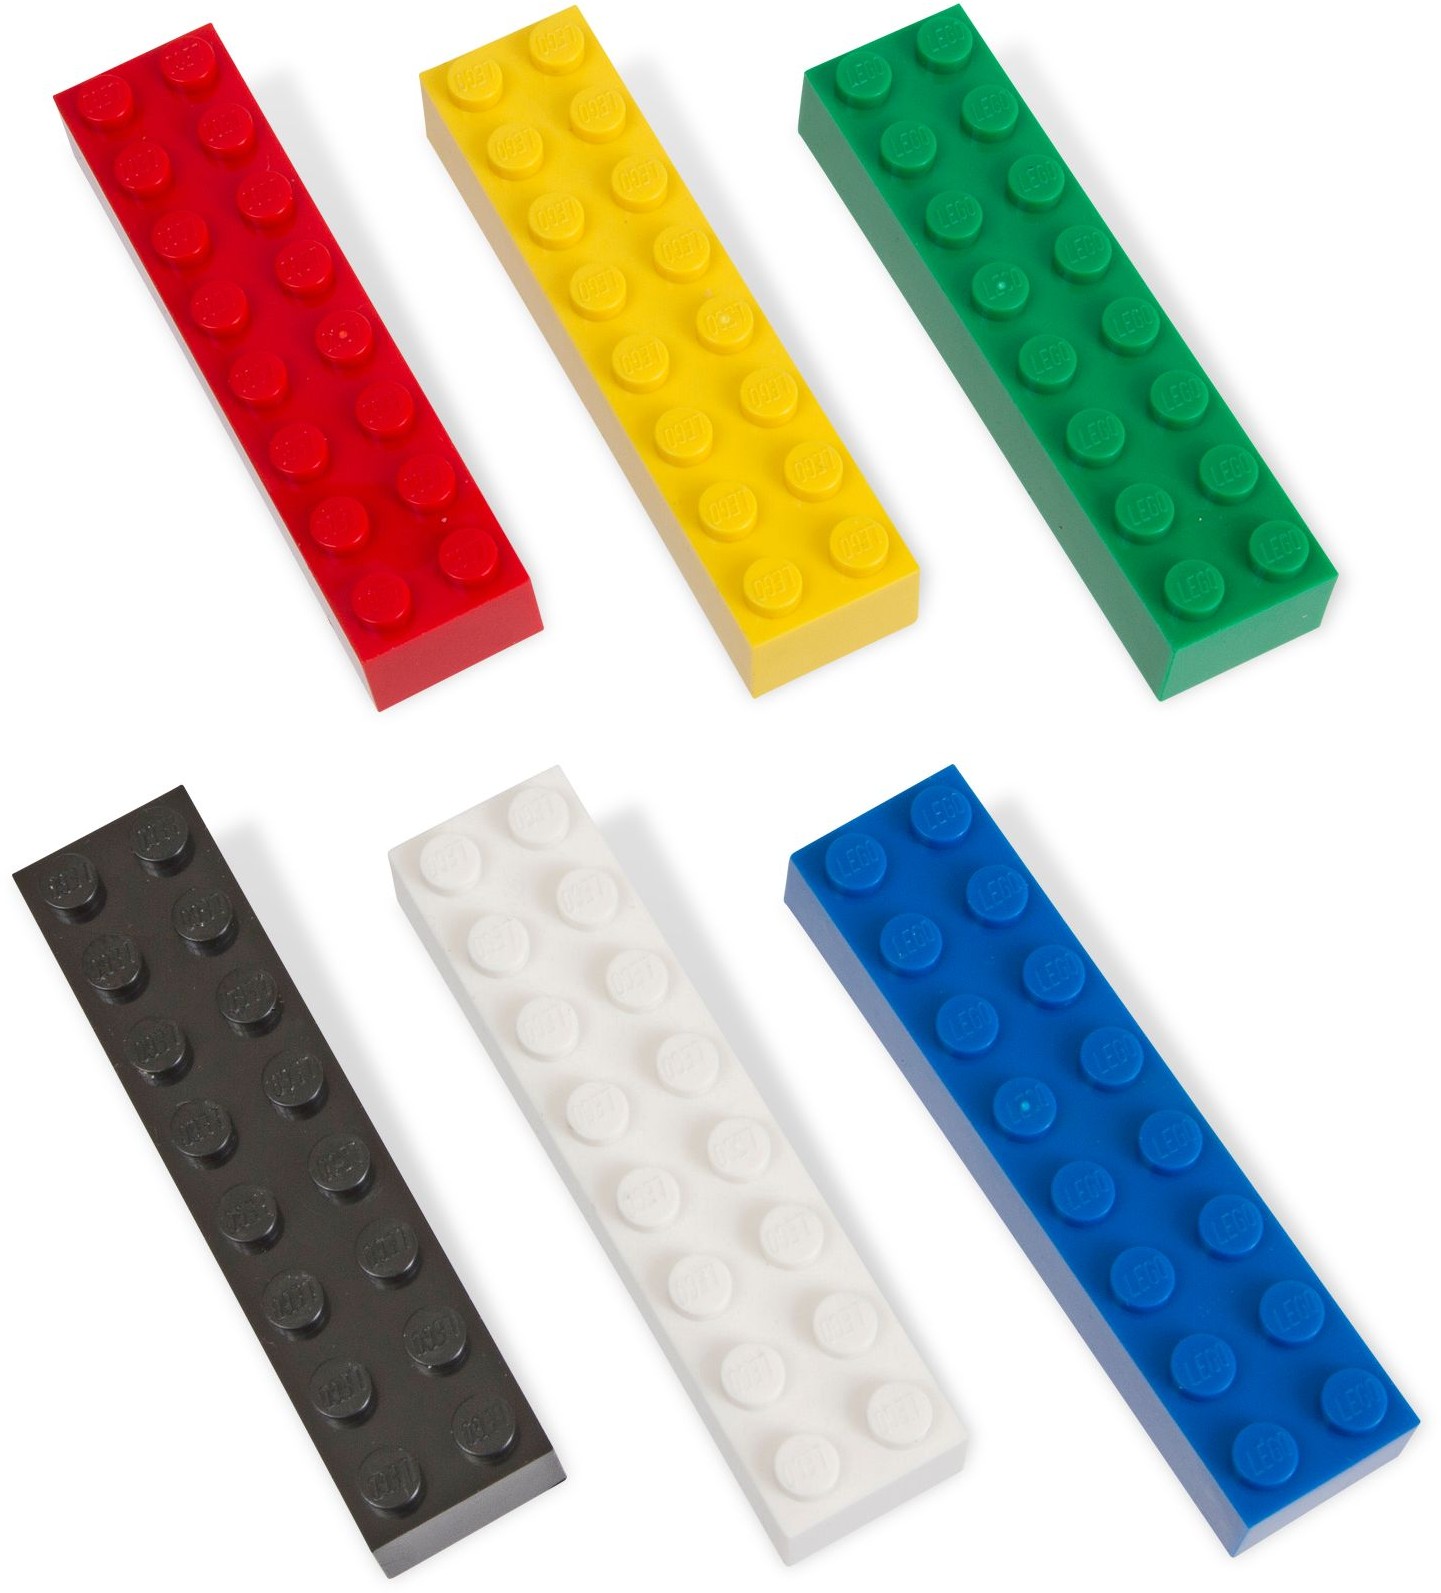 magnetic lego pieces